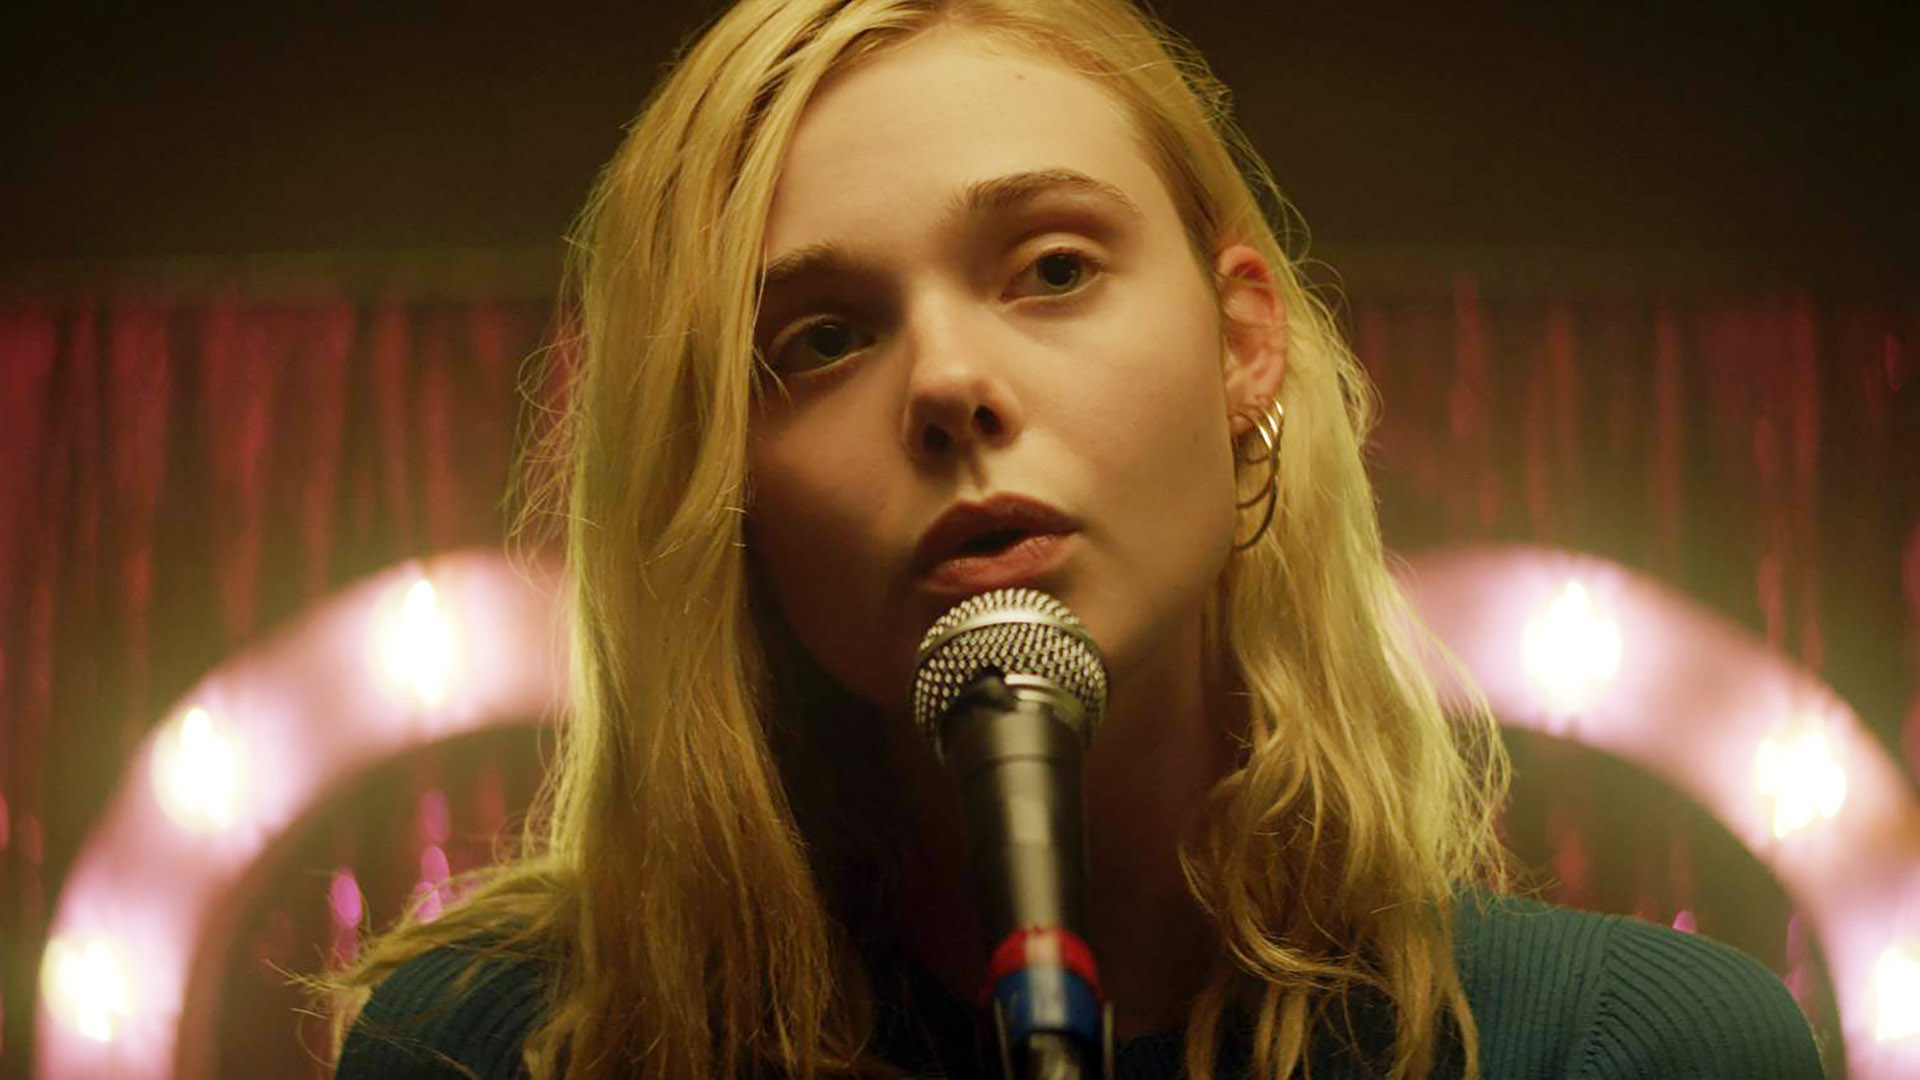 The 10 Best Elle Fanning Movies, According to Rotten Tomatoes